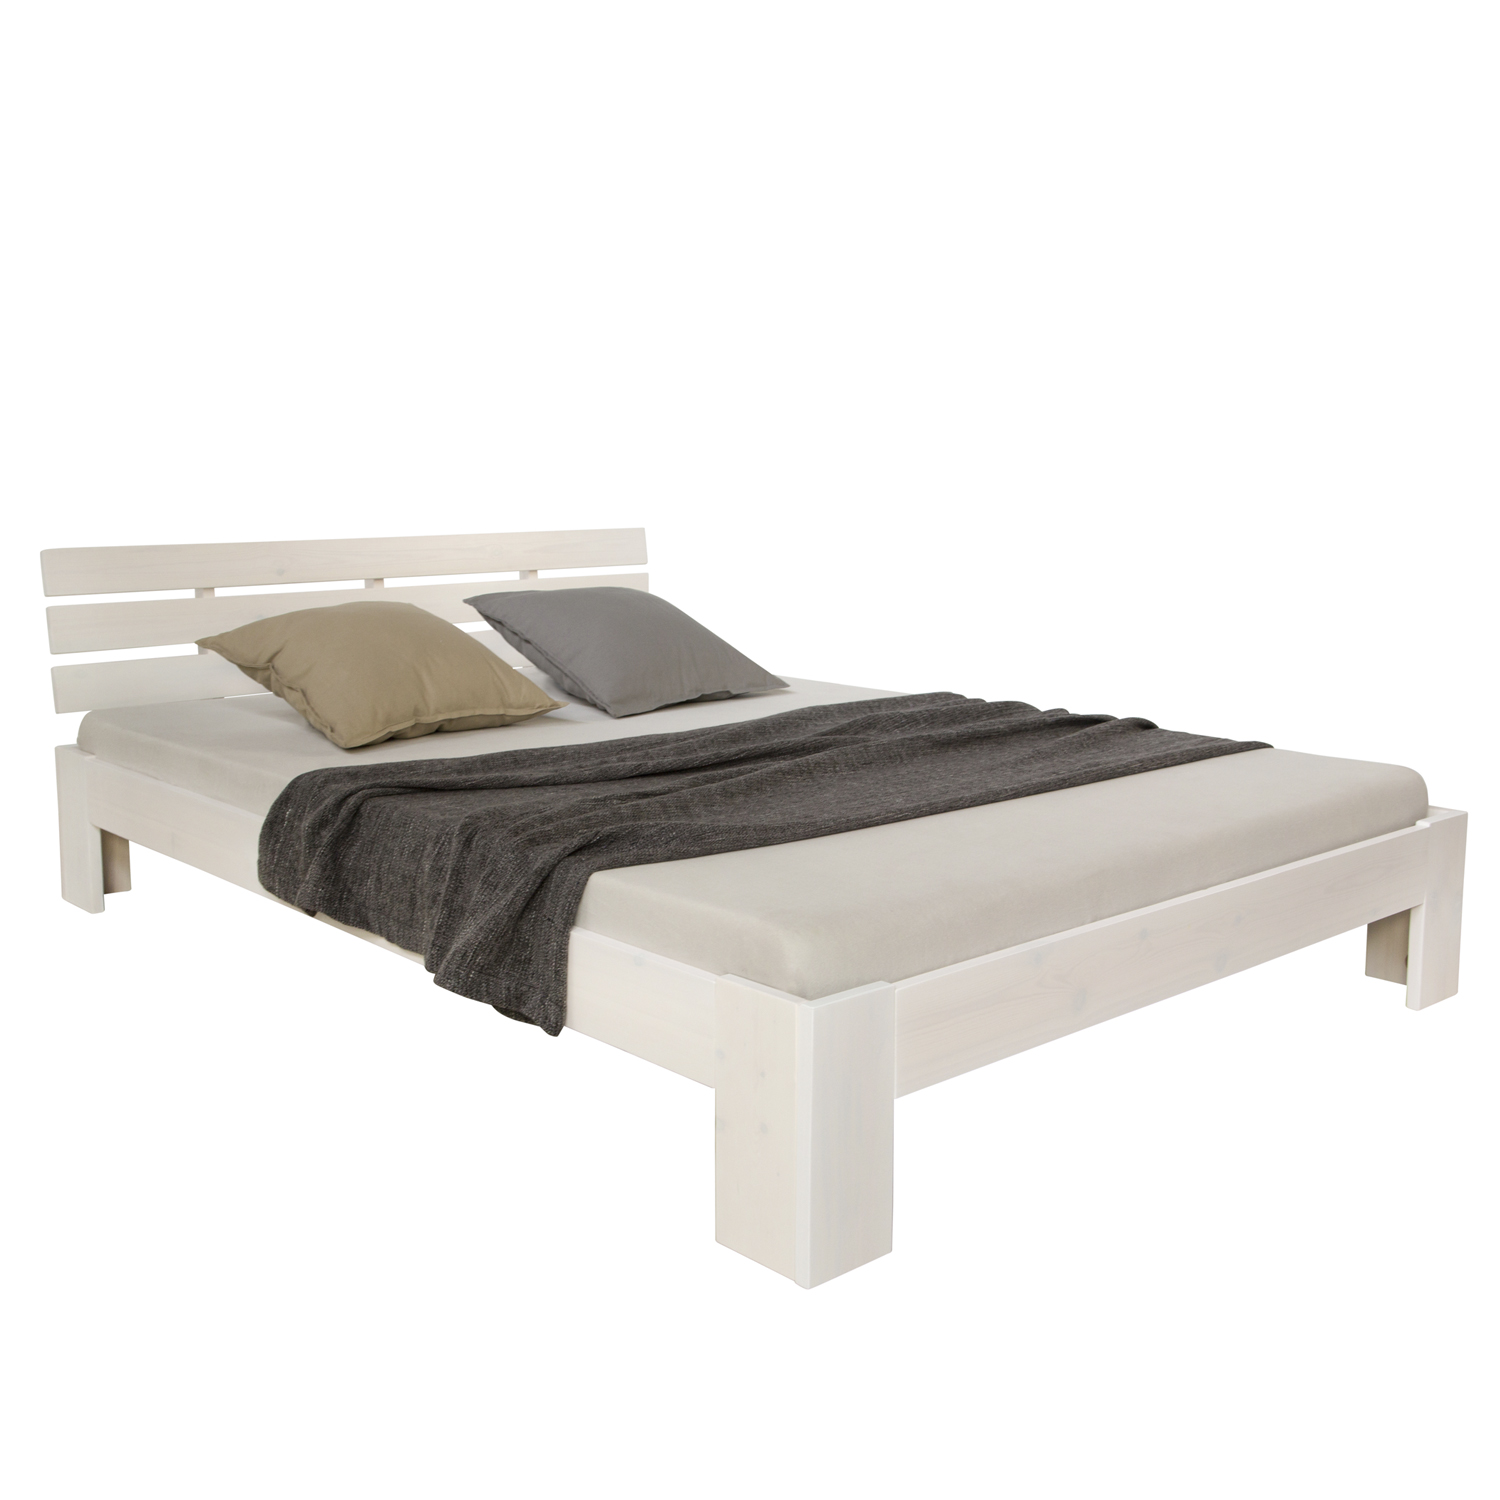 wooden bed 120 x 200 cm white double bed